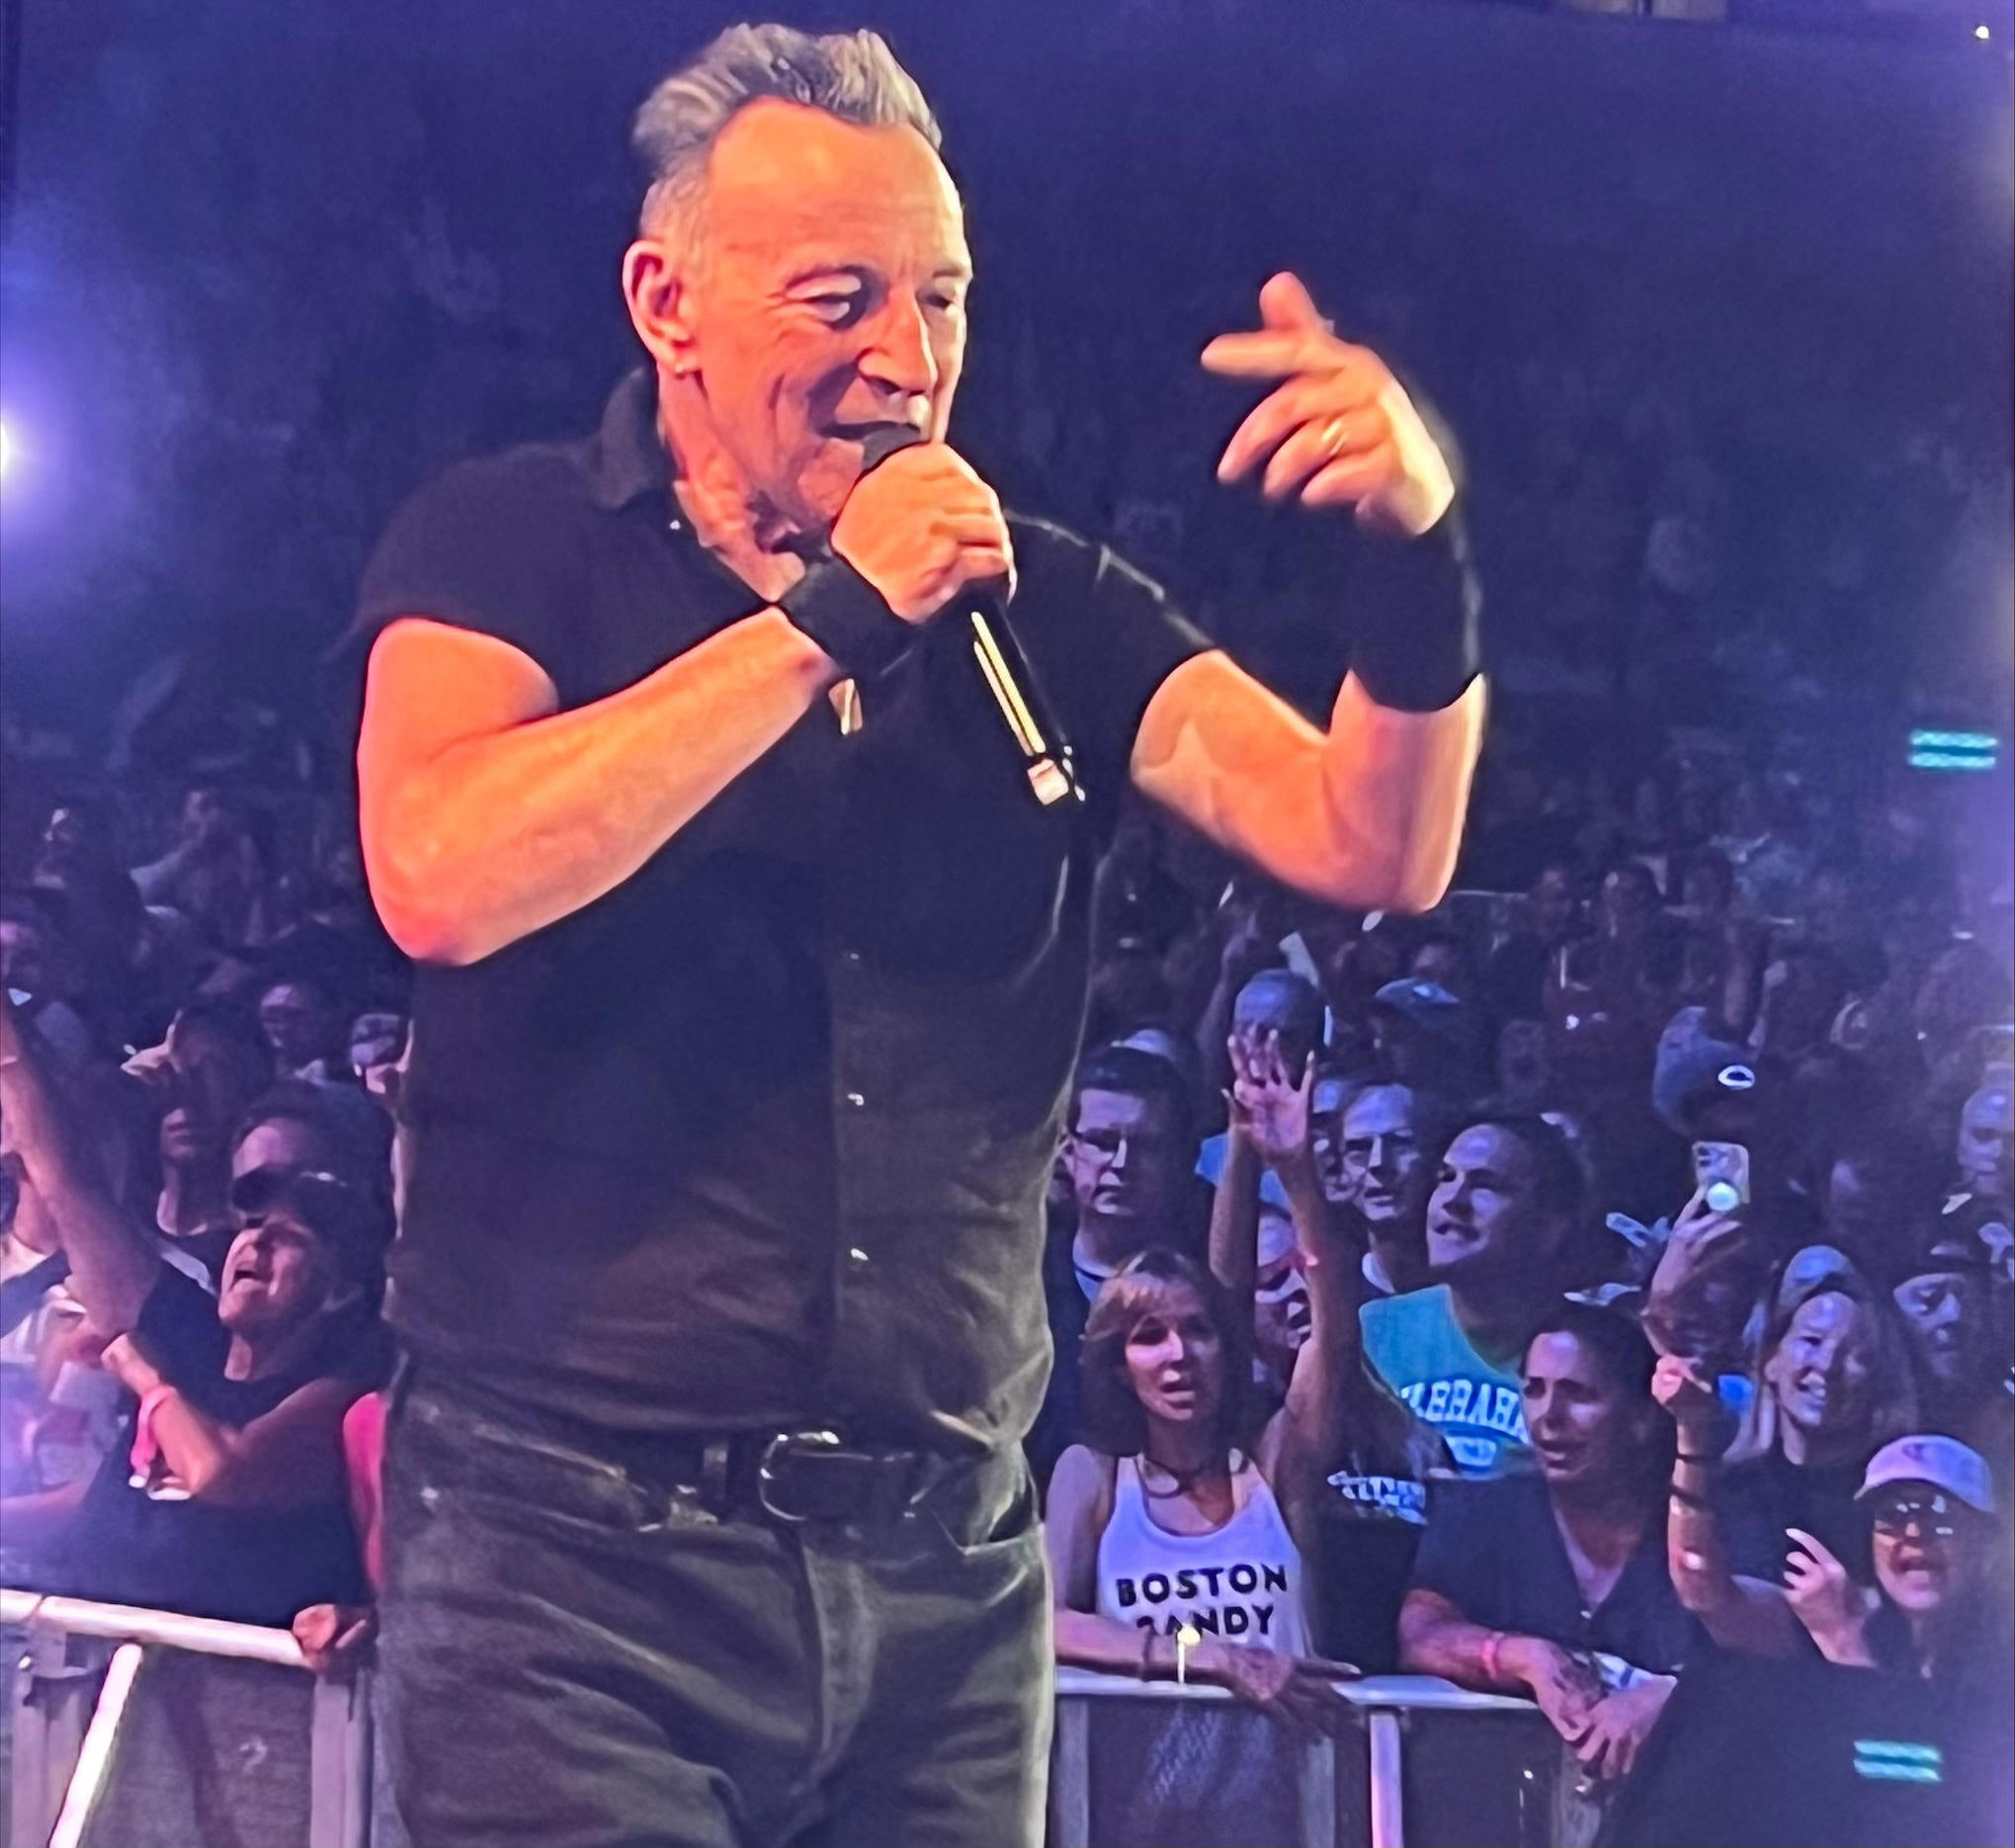 Bruce Springsteen delivers classic show in return to Gillette Stadium